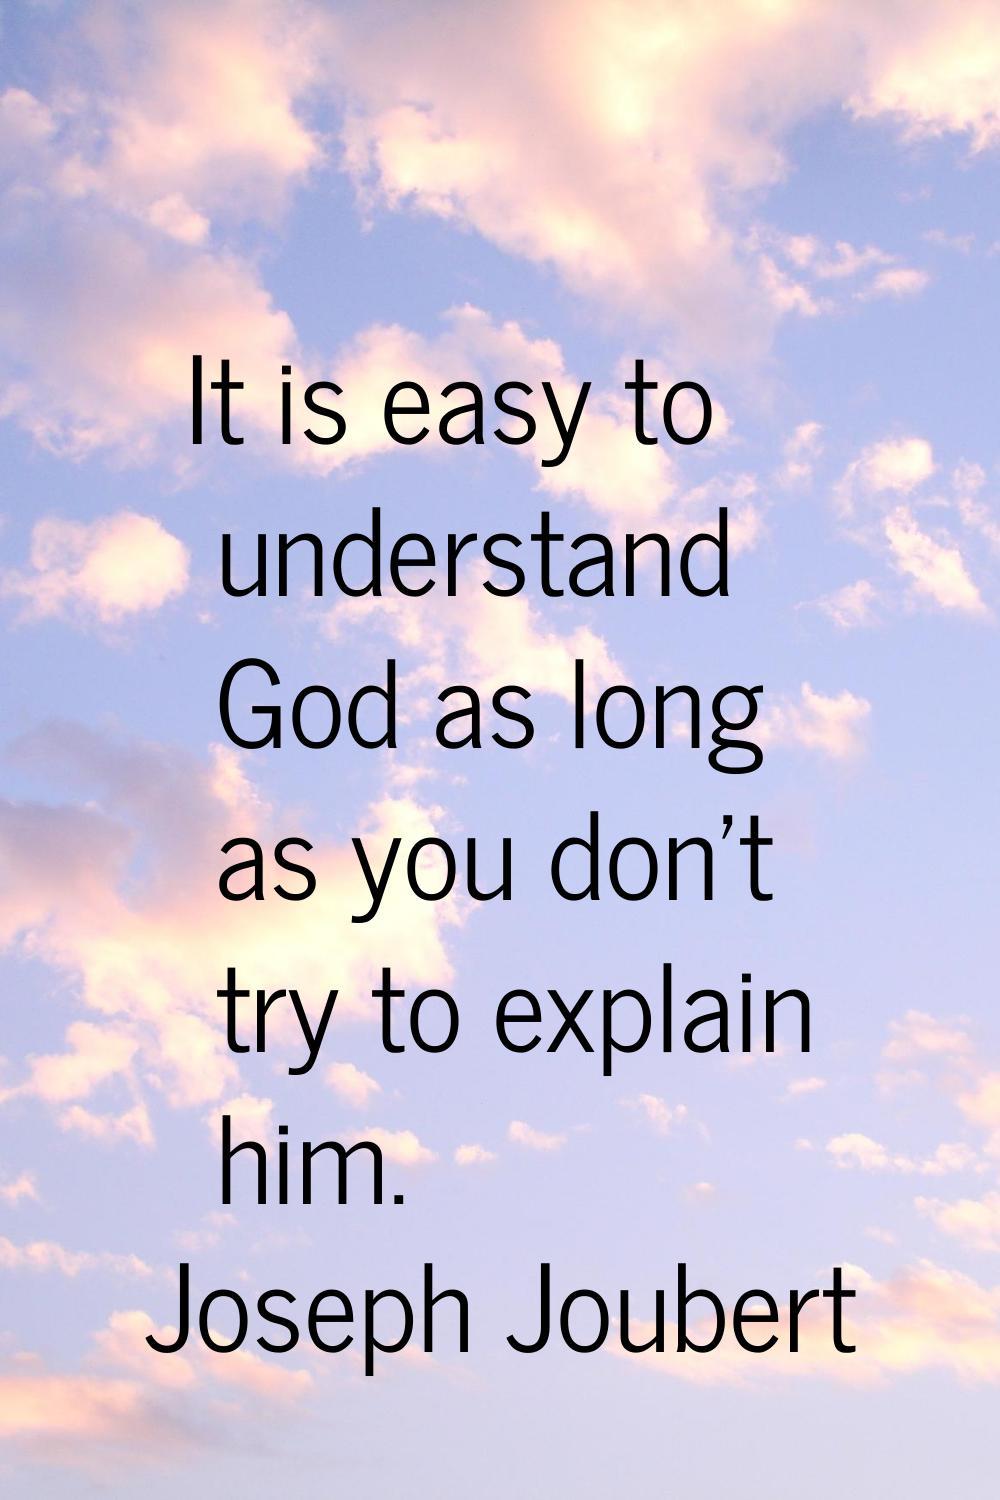 It is easy to understand God as long as you don't try to explain him.